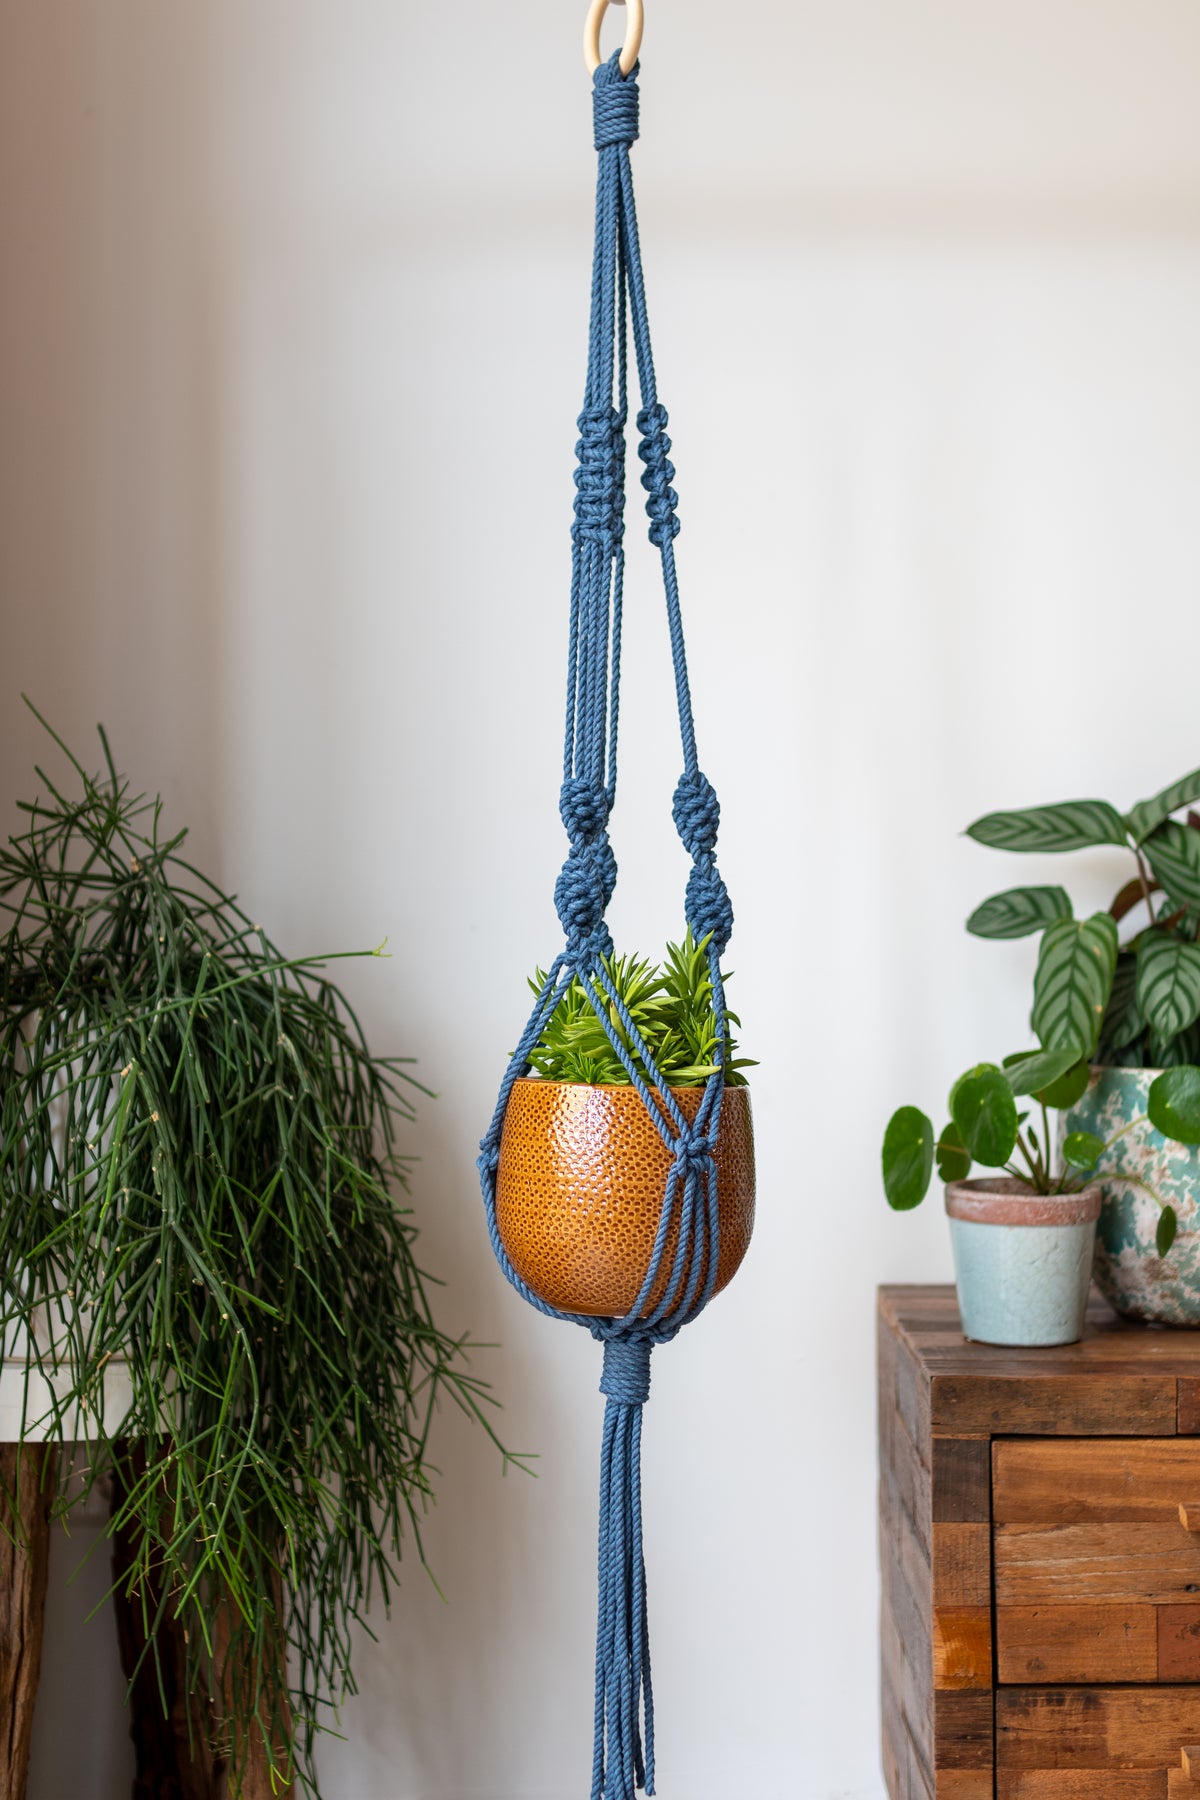 Knotted Macrame Plant Hanger - 40&quot; (100cm) in Length by